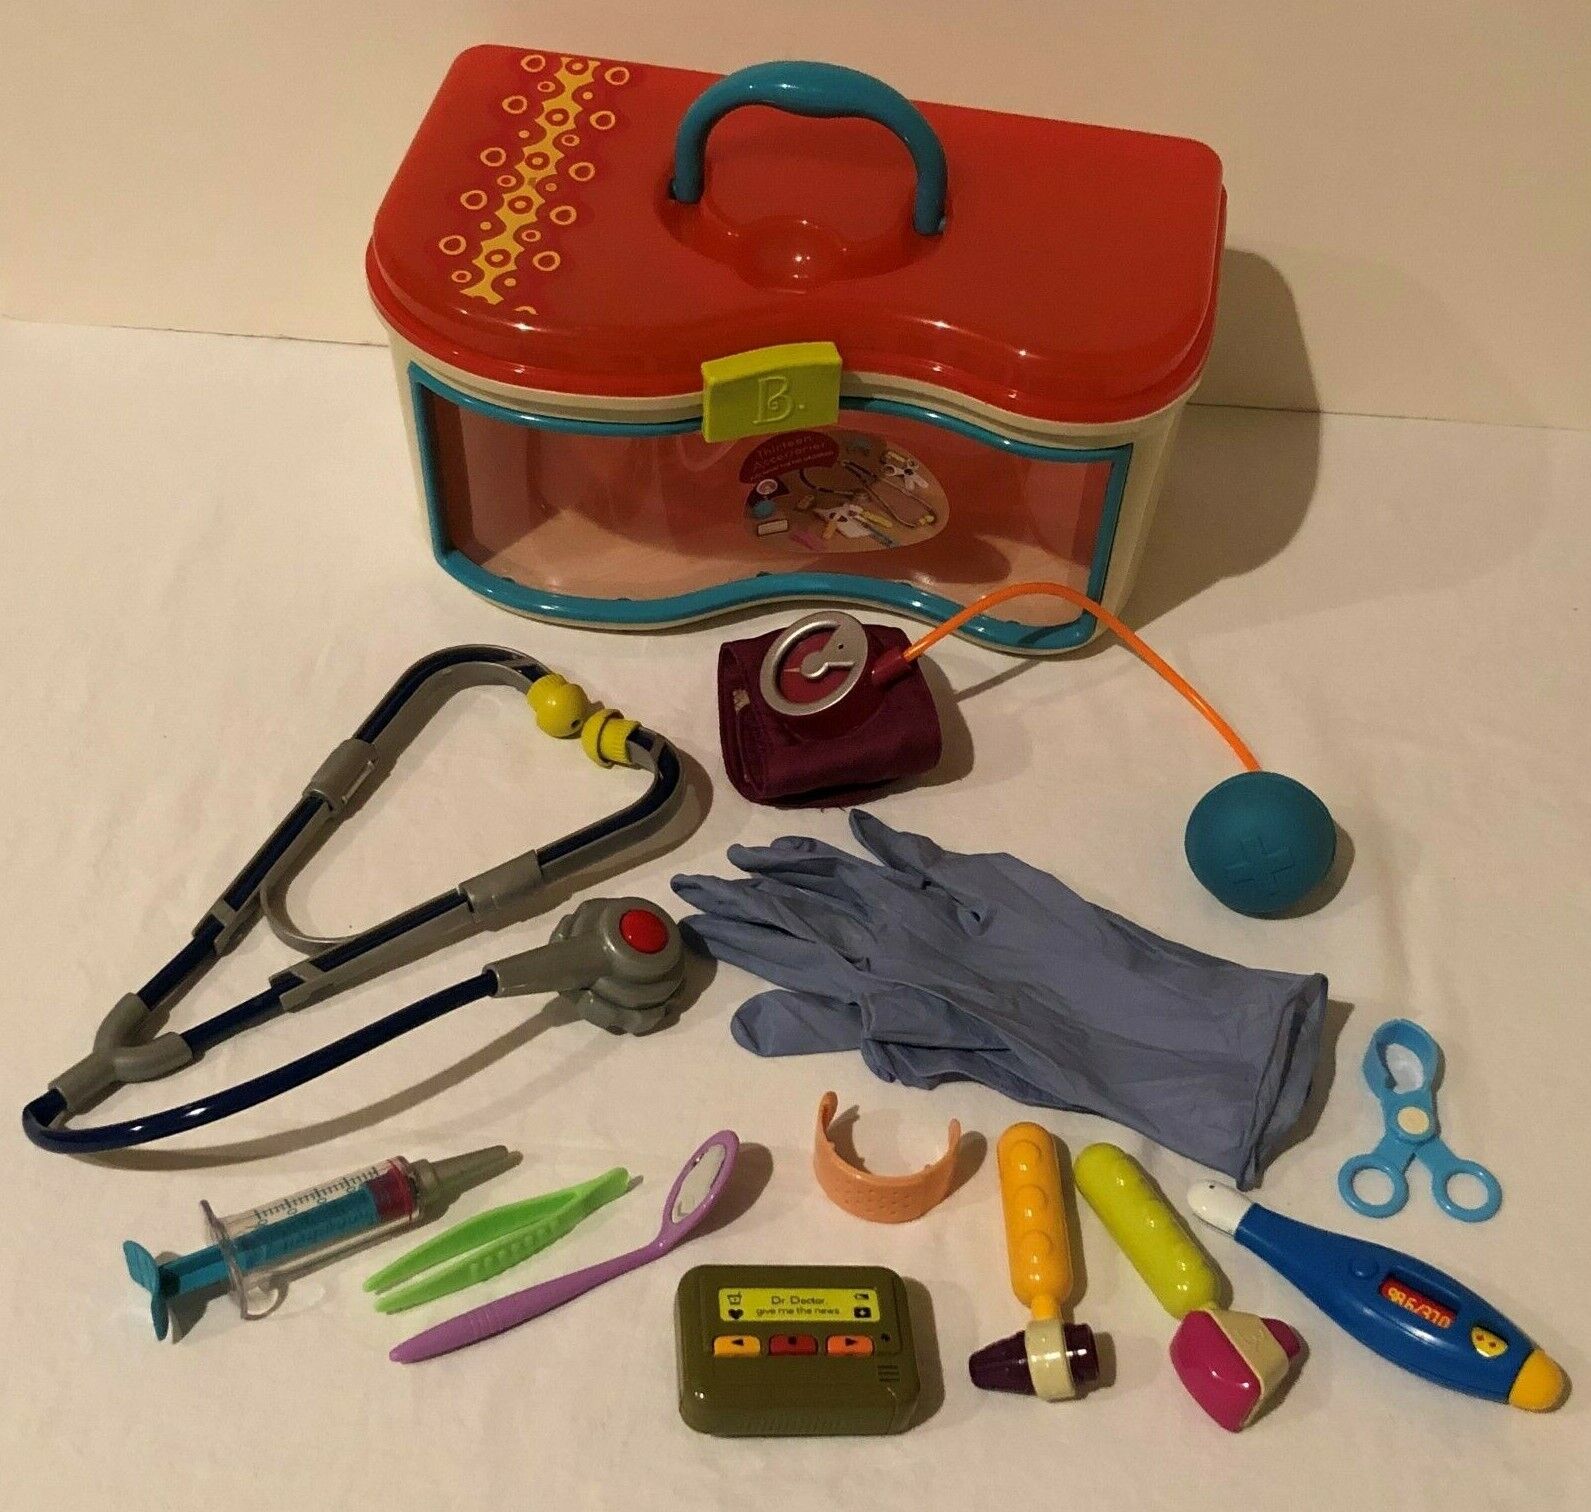 B Toys Pretend Play Medical Doctor Kit Set Toy Pager Stethosco...